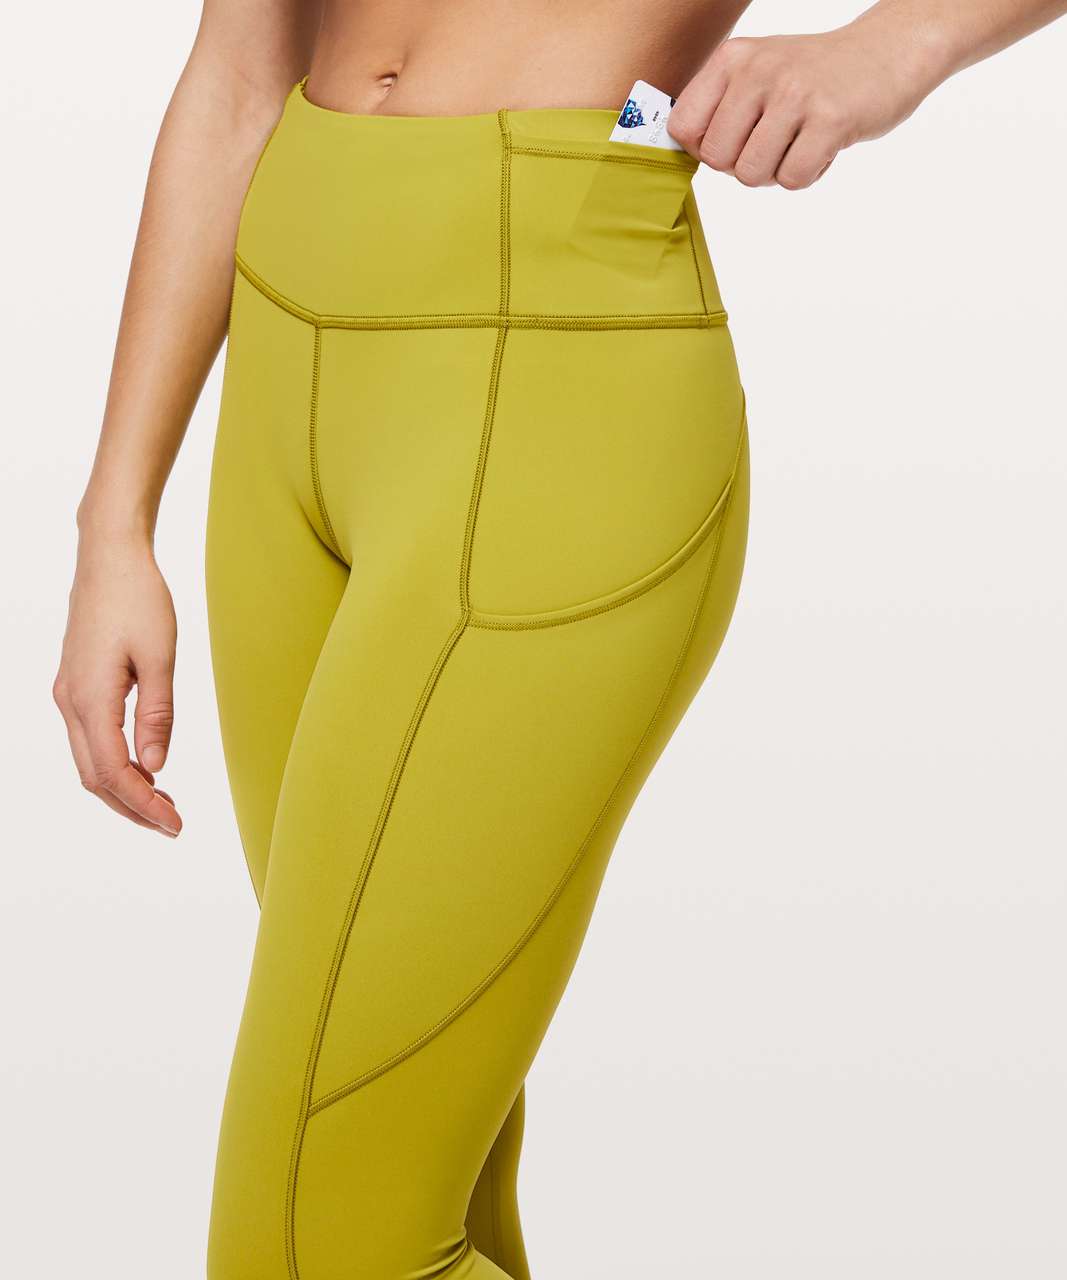 Lululemon Fast and Free Tight II 25" *Non-Reflective Nulux - Golden Lime